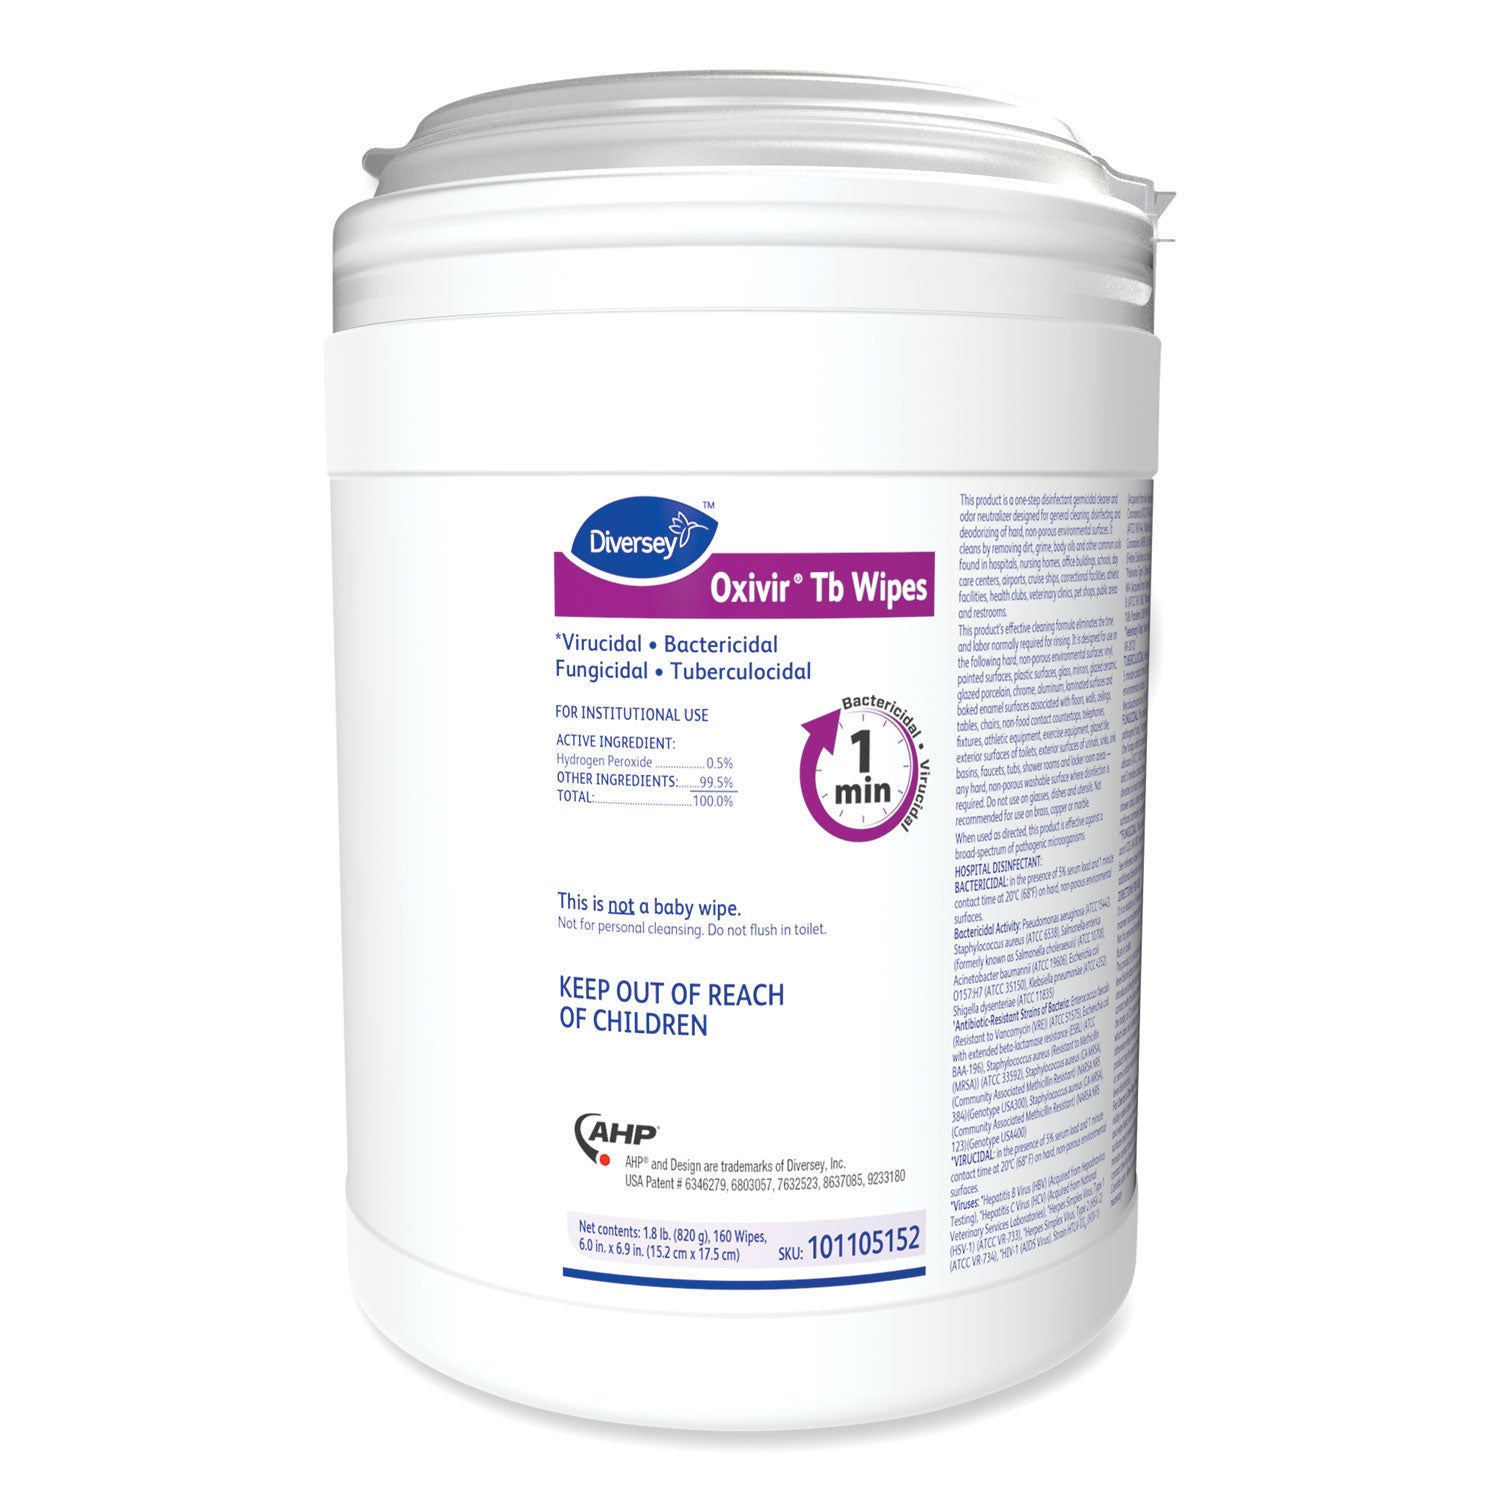 oxivir-tb-disinfectant-wipes-6-x-69-characteristic-scent-white-160-canister-4-canisters-carton_dvo101105152 - 1